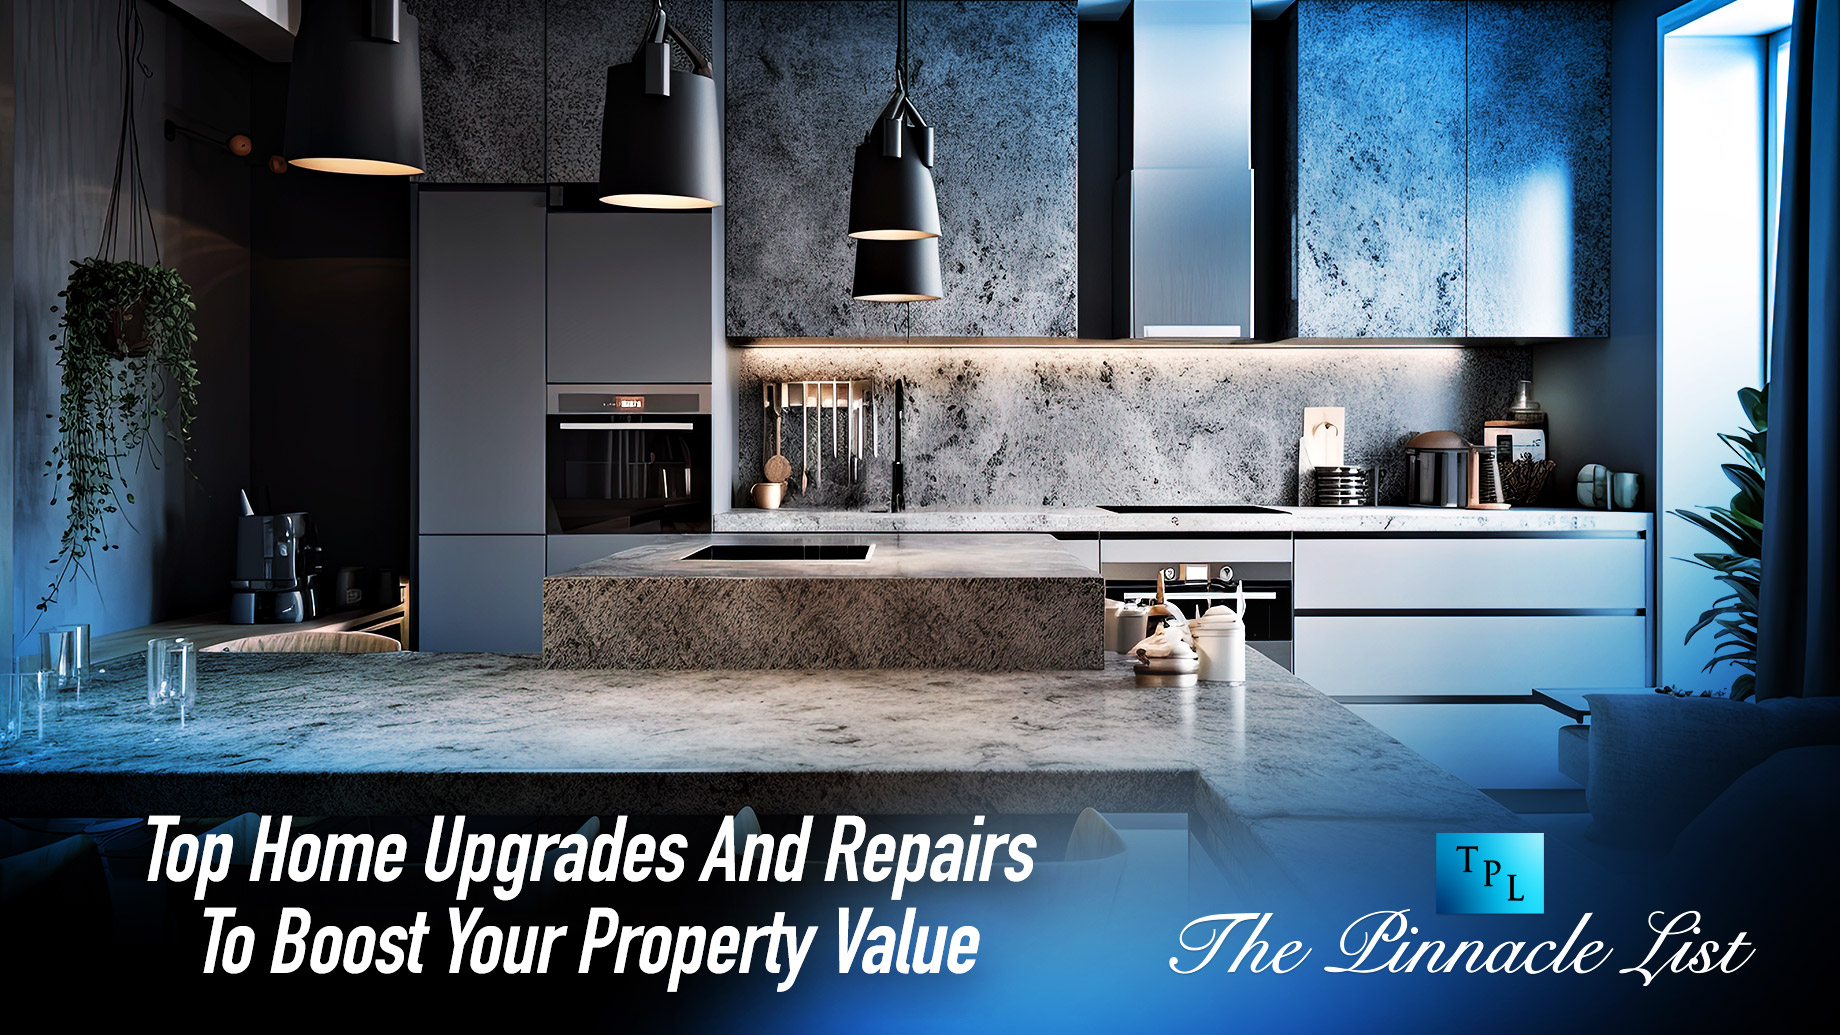 Top Home Upgrades And Repairs To Boost Your Property Value